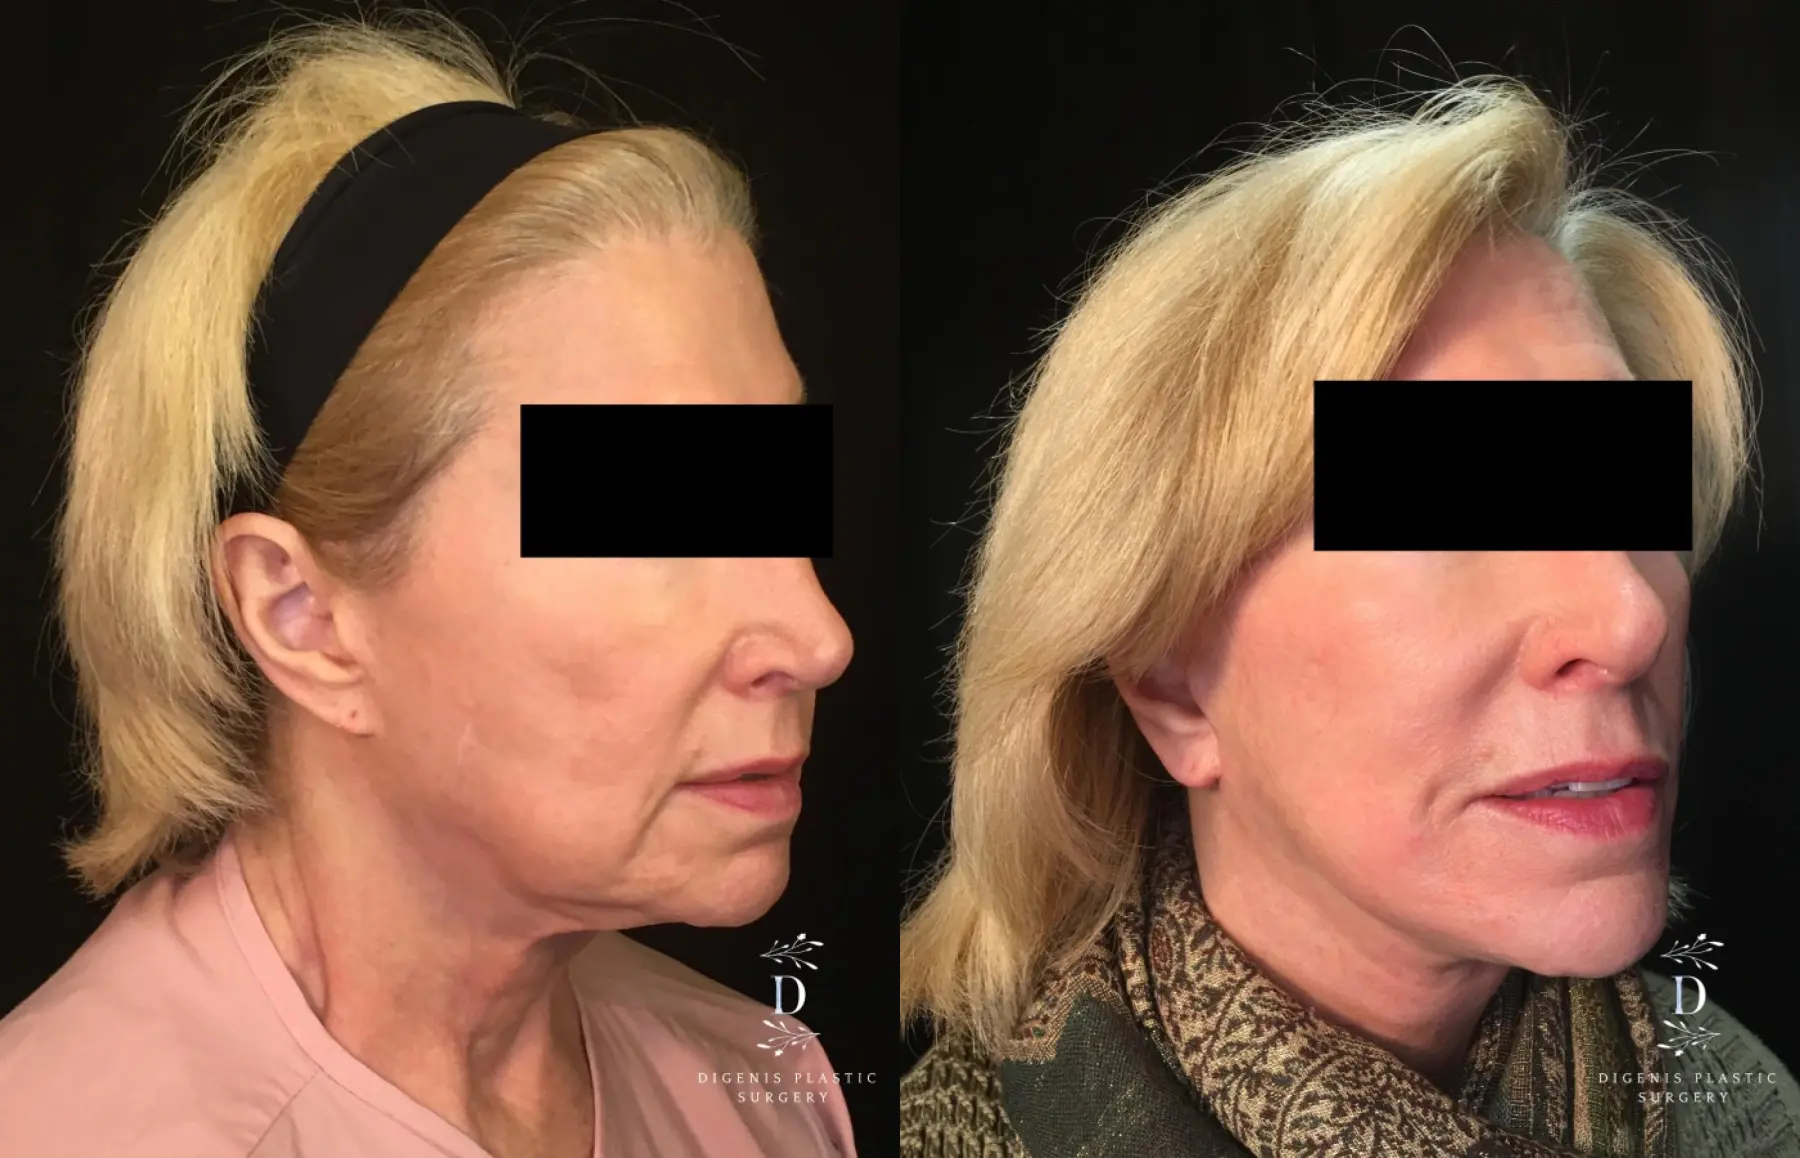 Facelift: Patient 21 - Before and After 2